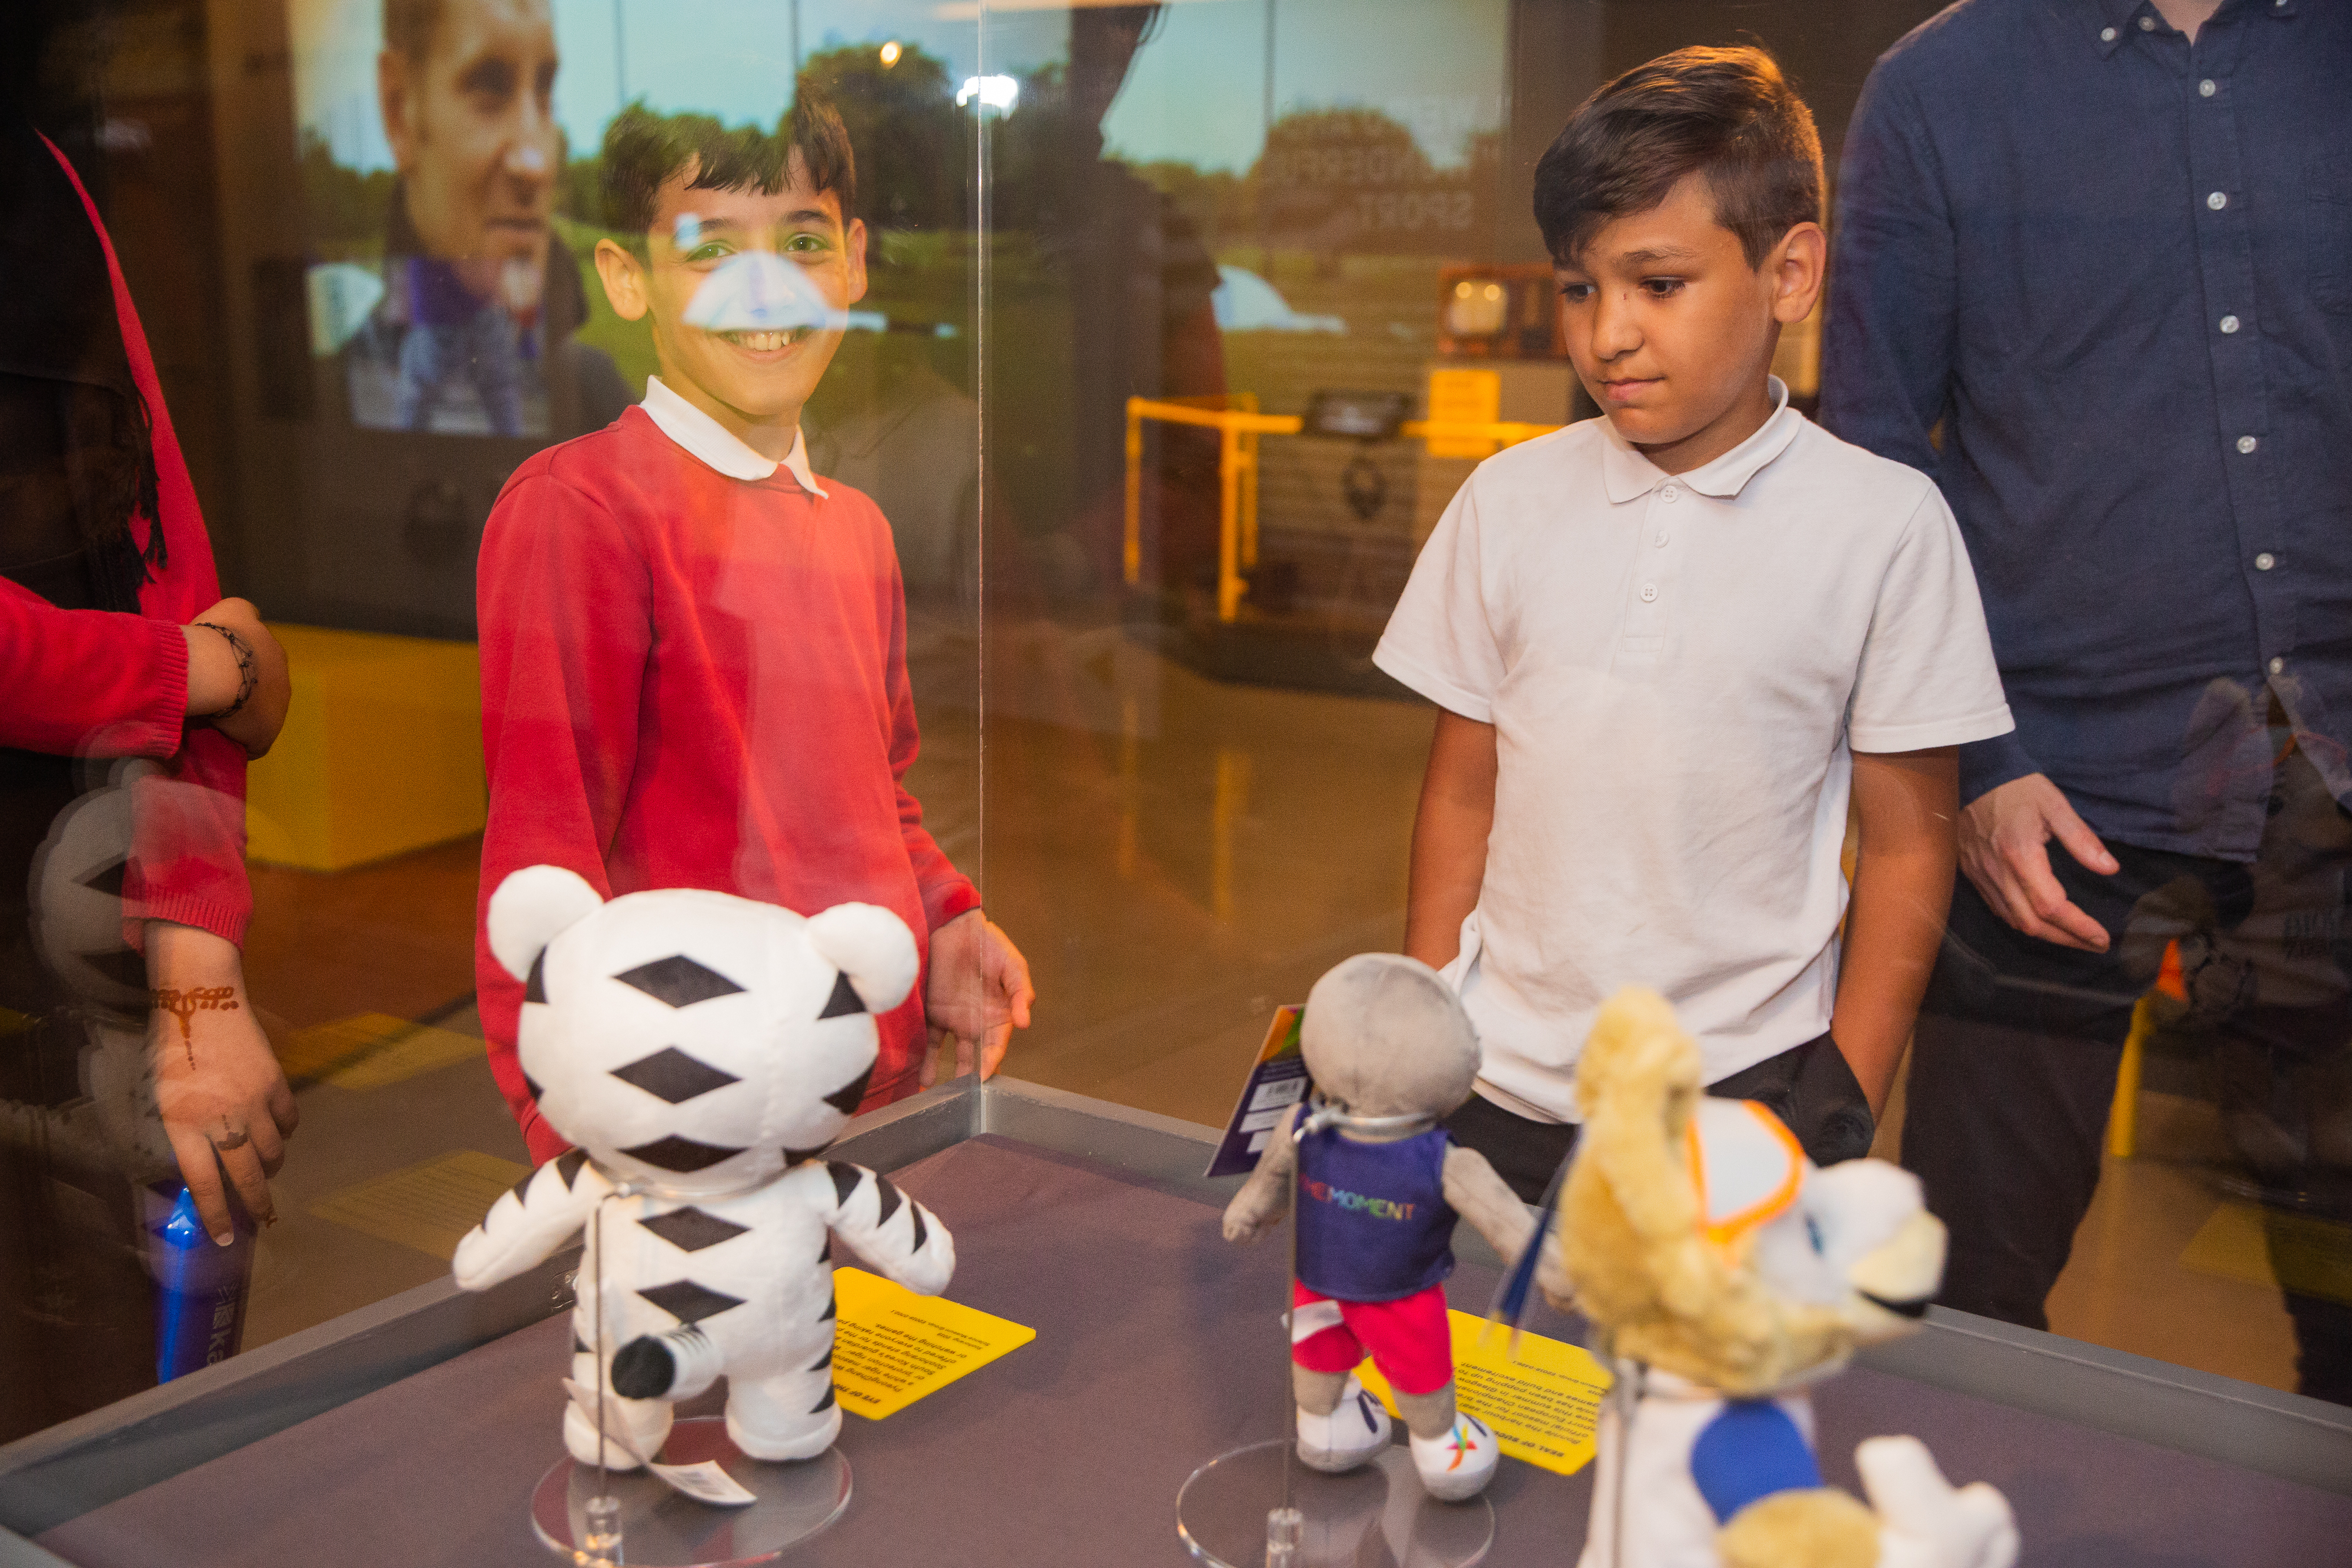 Students looking at mascots at the Action Replay exhibition